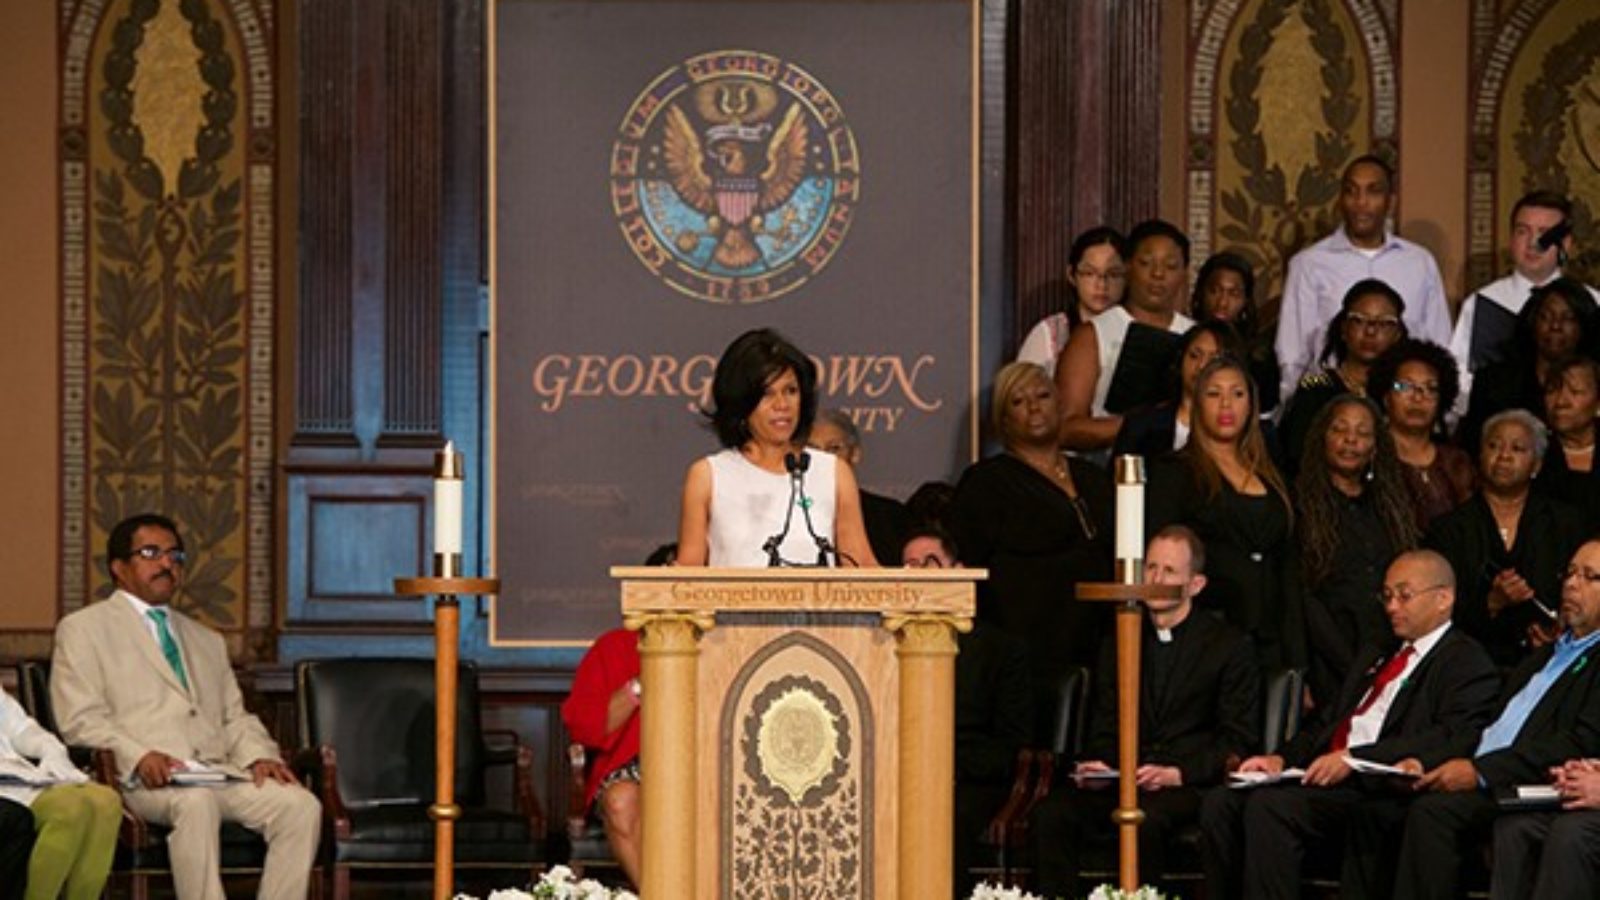 Sandra Green Thomas at the podium in Gaston Hall with a group of people standing at left